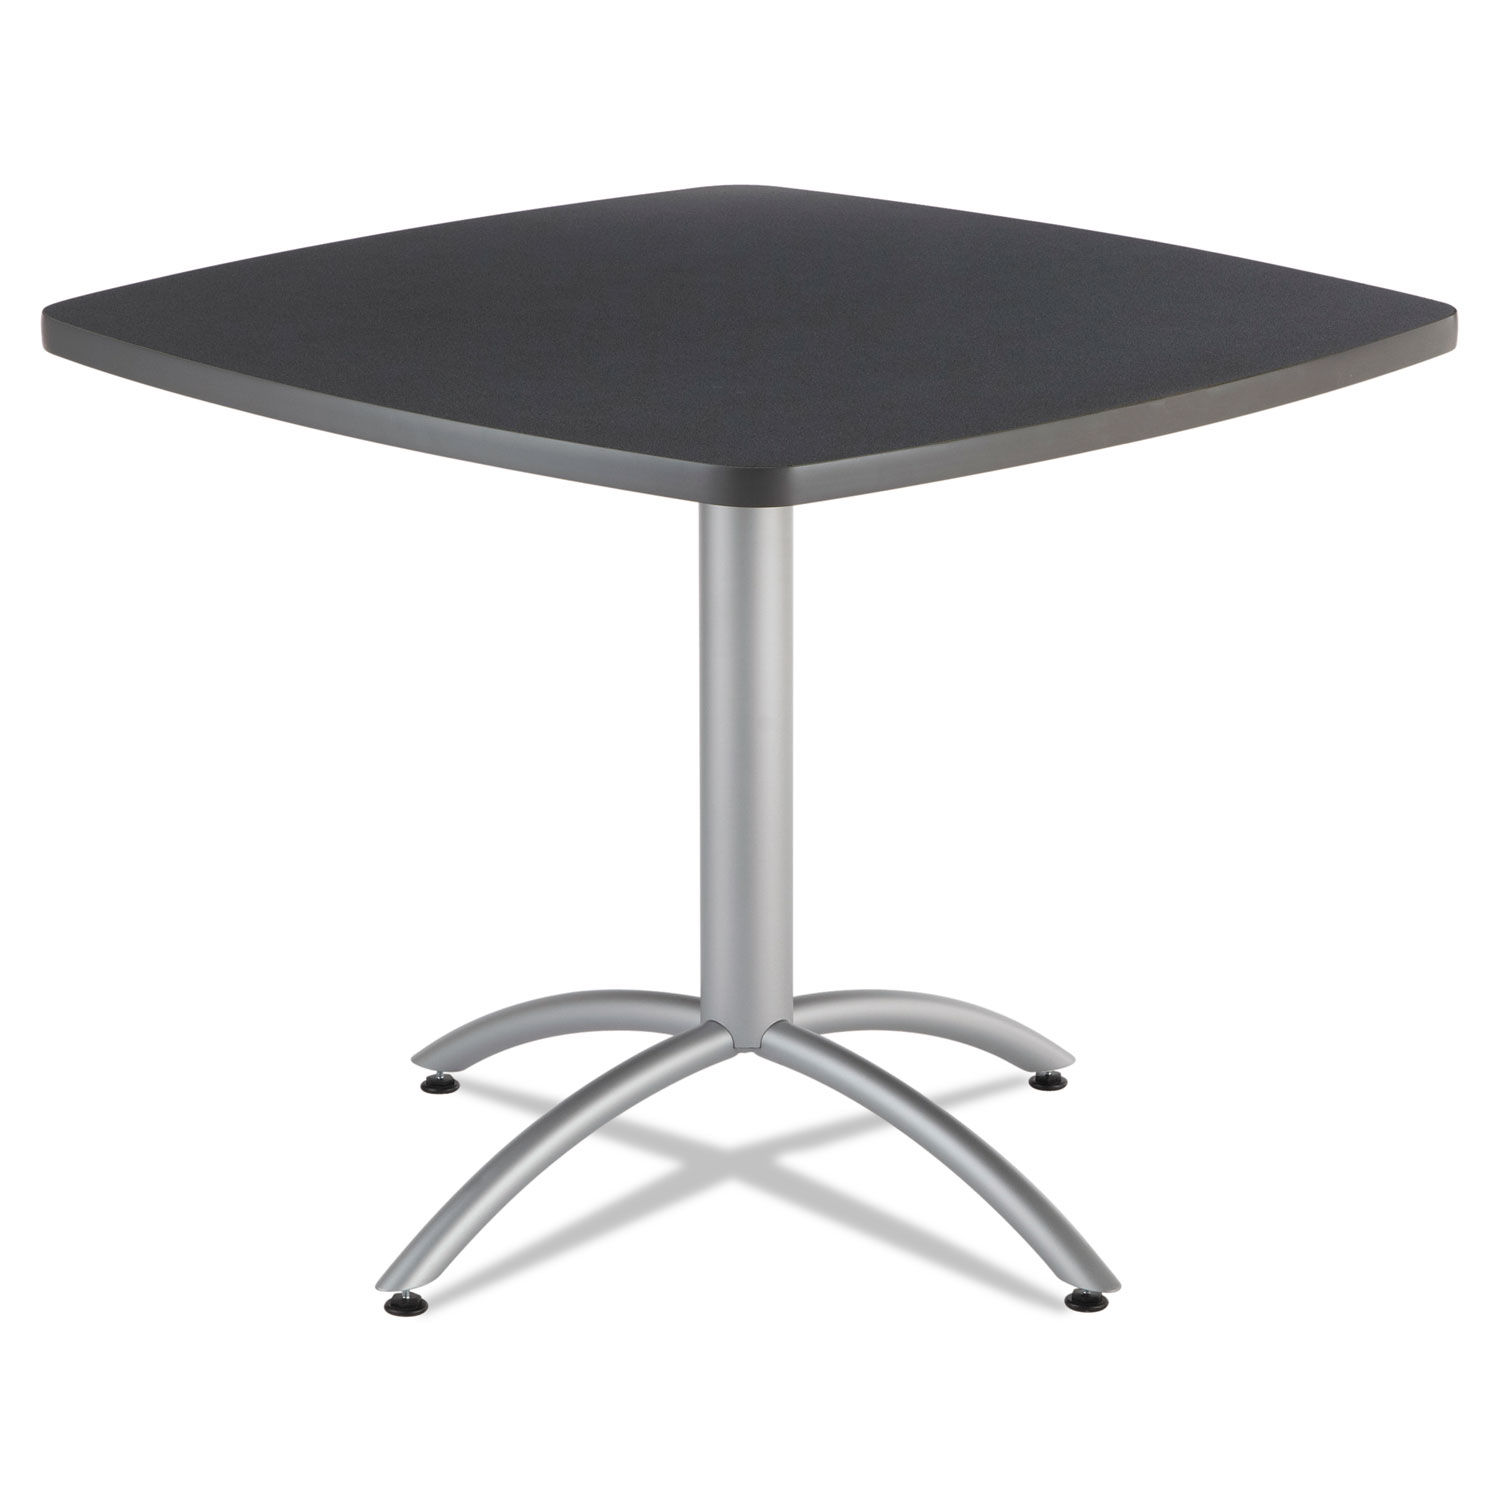 CafeWorks Table Cafe-Height, Square Top, 36w x 36d x 30h, Graphite Granite/Silver